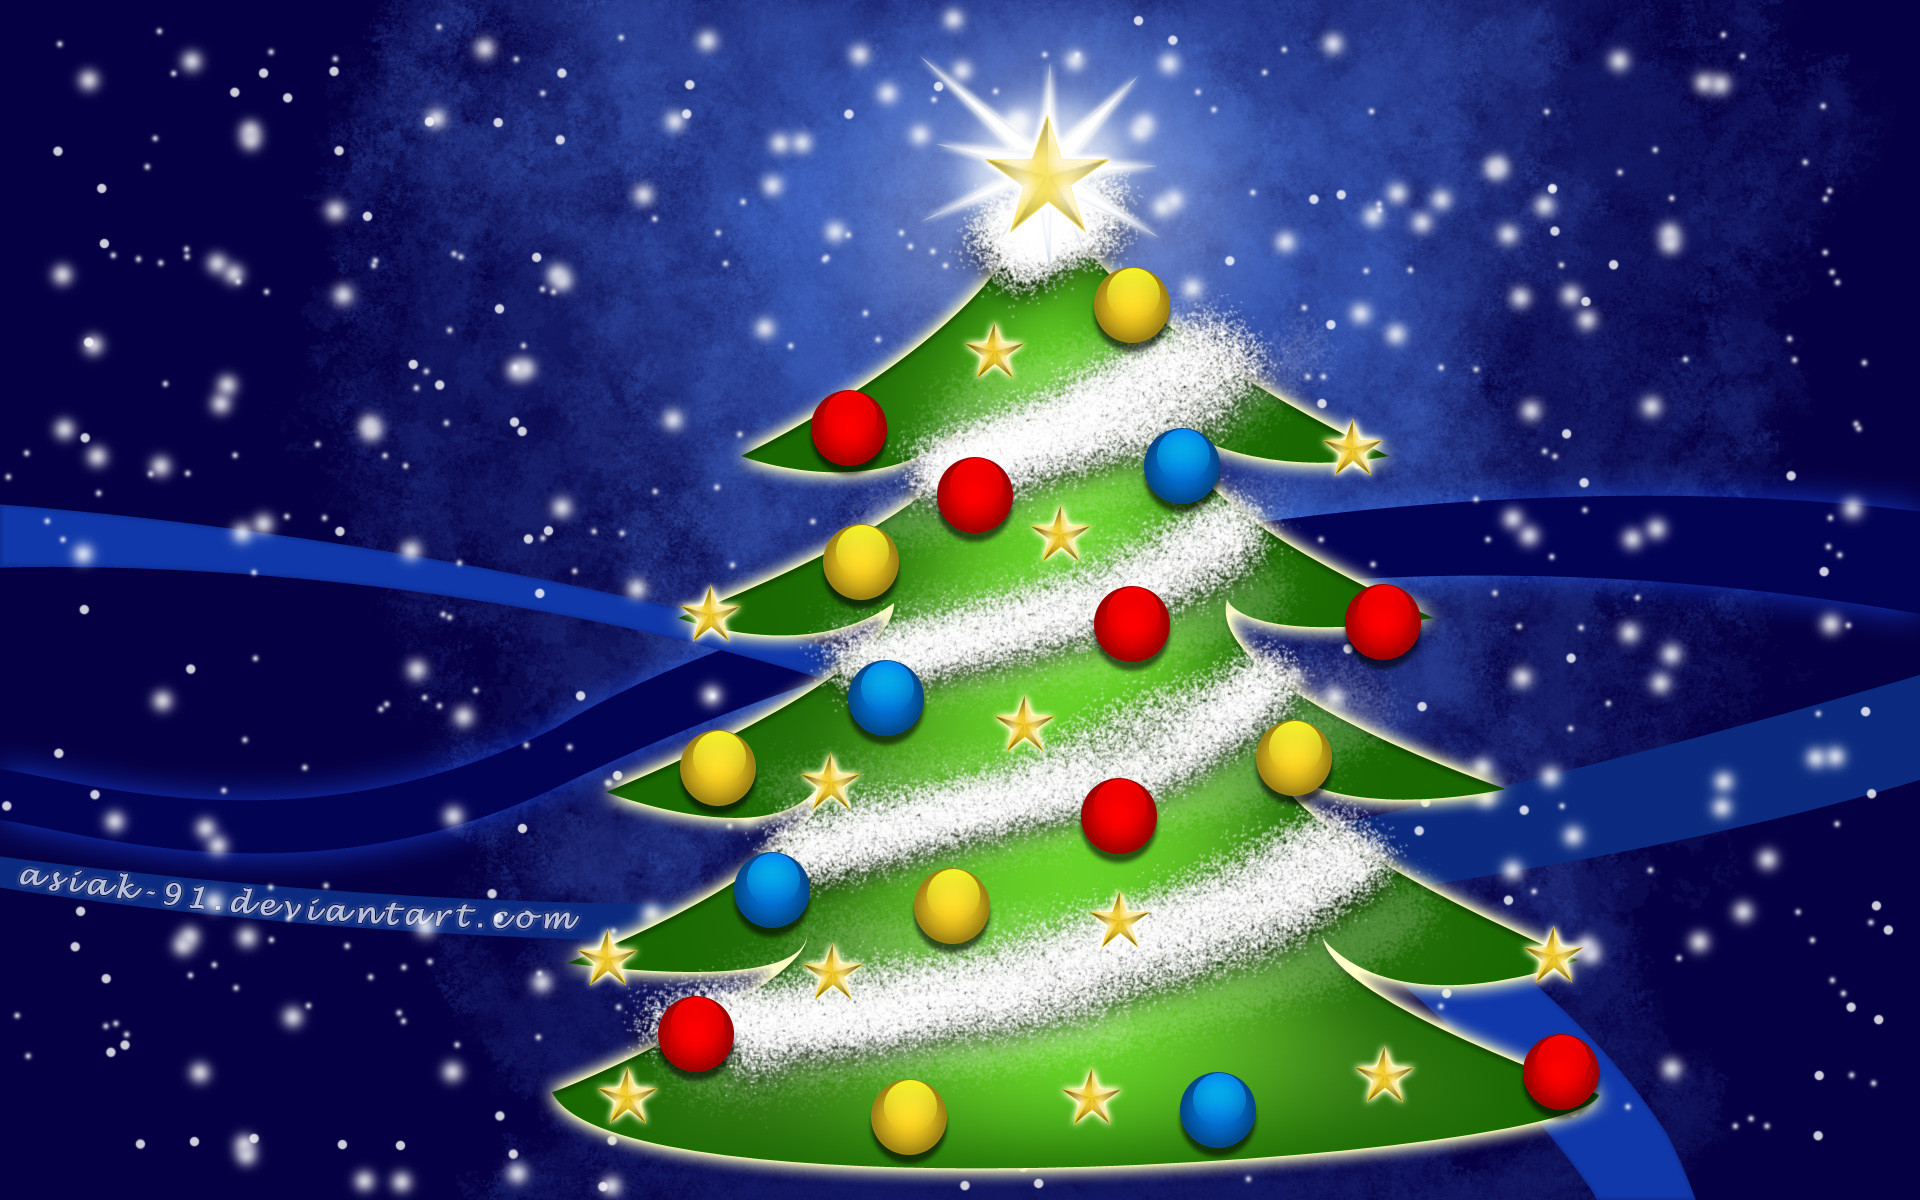 Christmas, cool, wallpaper, image, widescreen, tree, photo, wallpapers